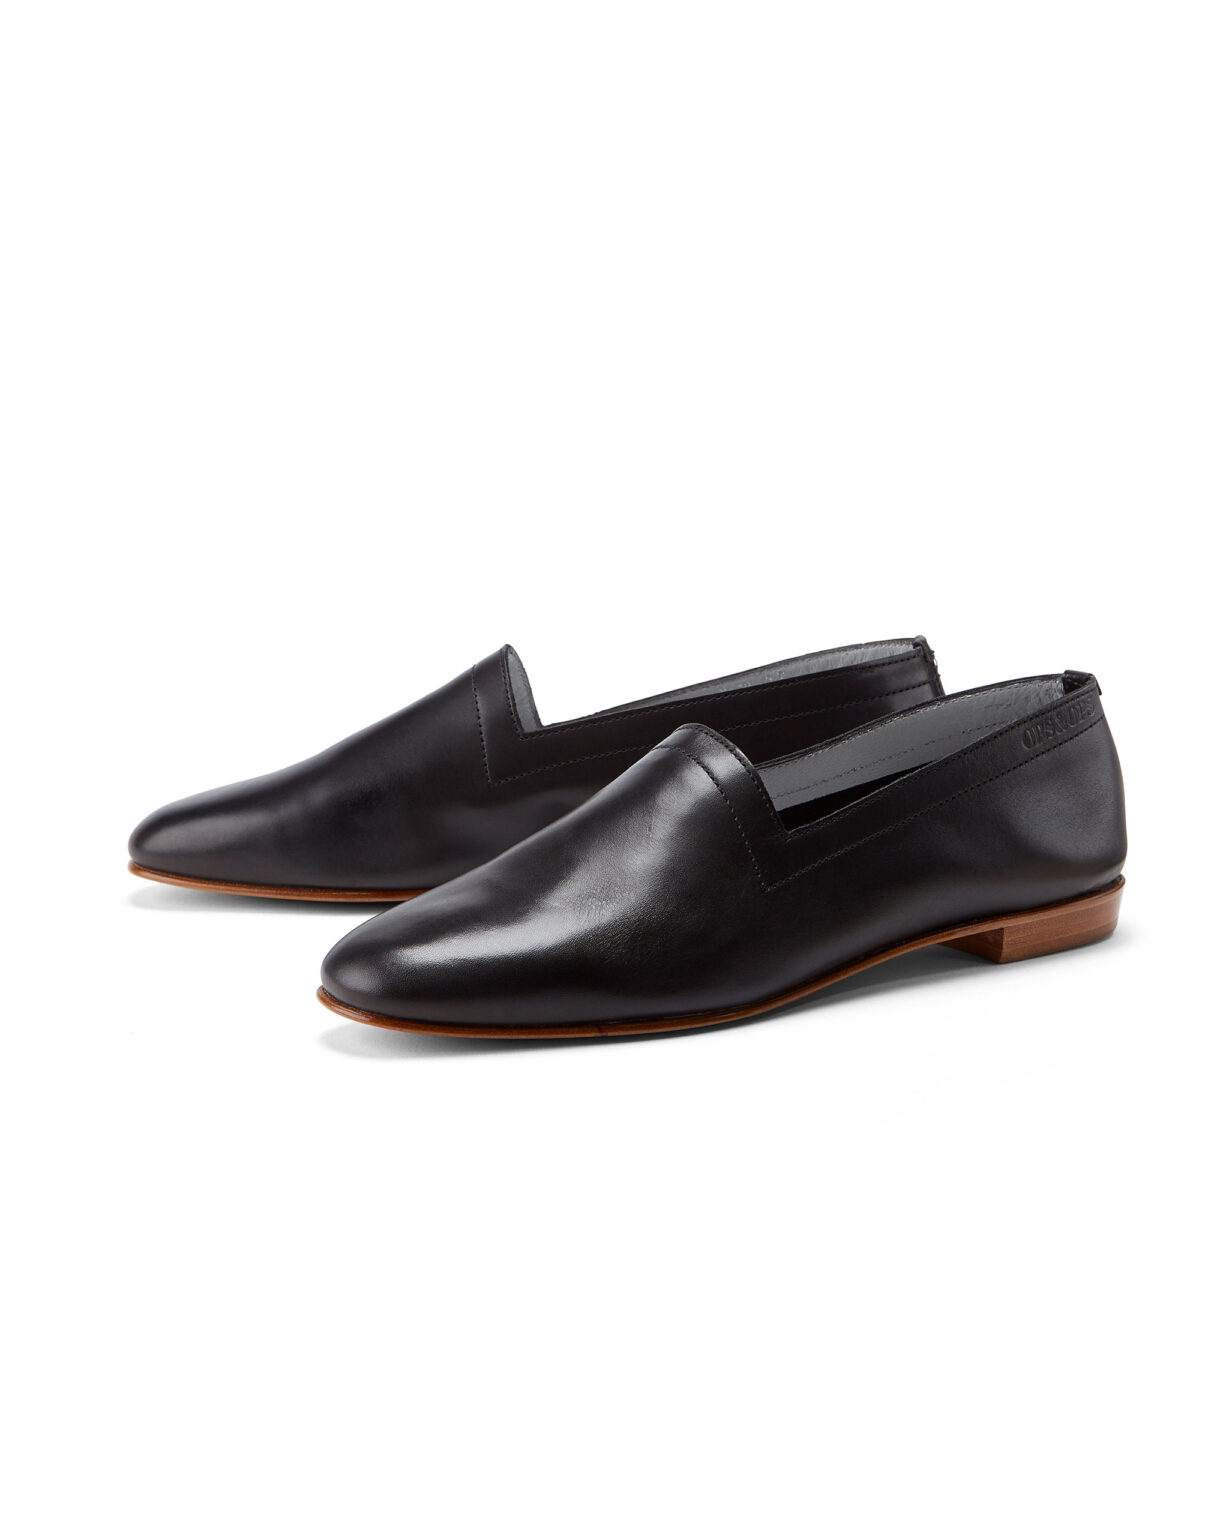 No.10 Classic Black Leather Flats - Ops & Ops